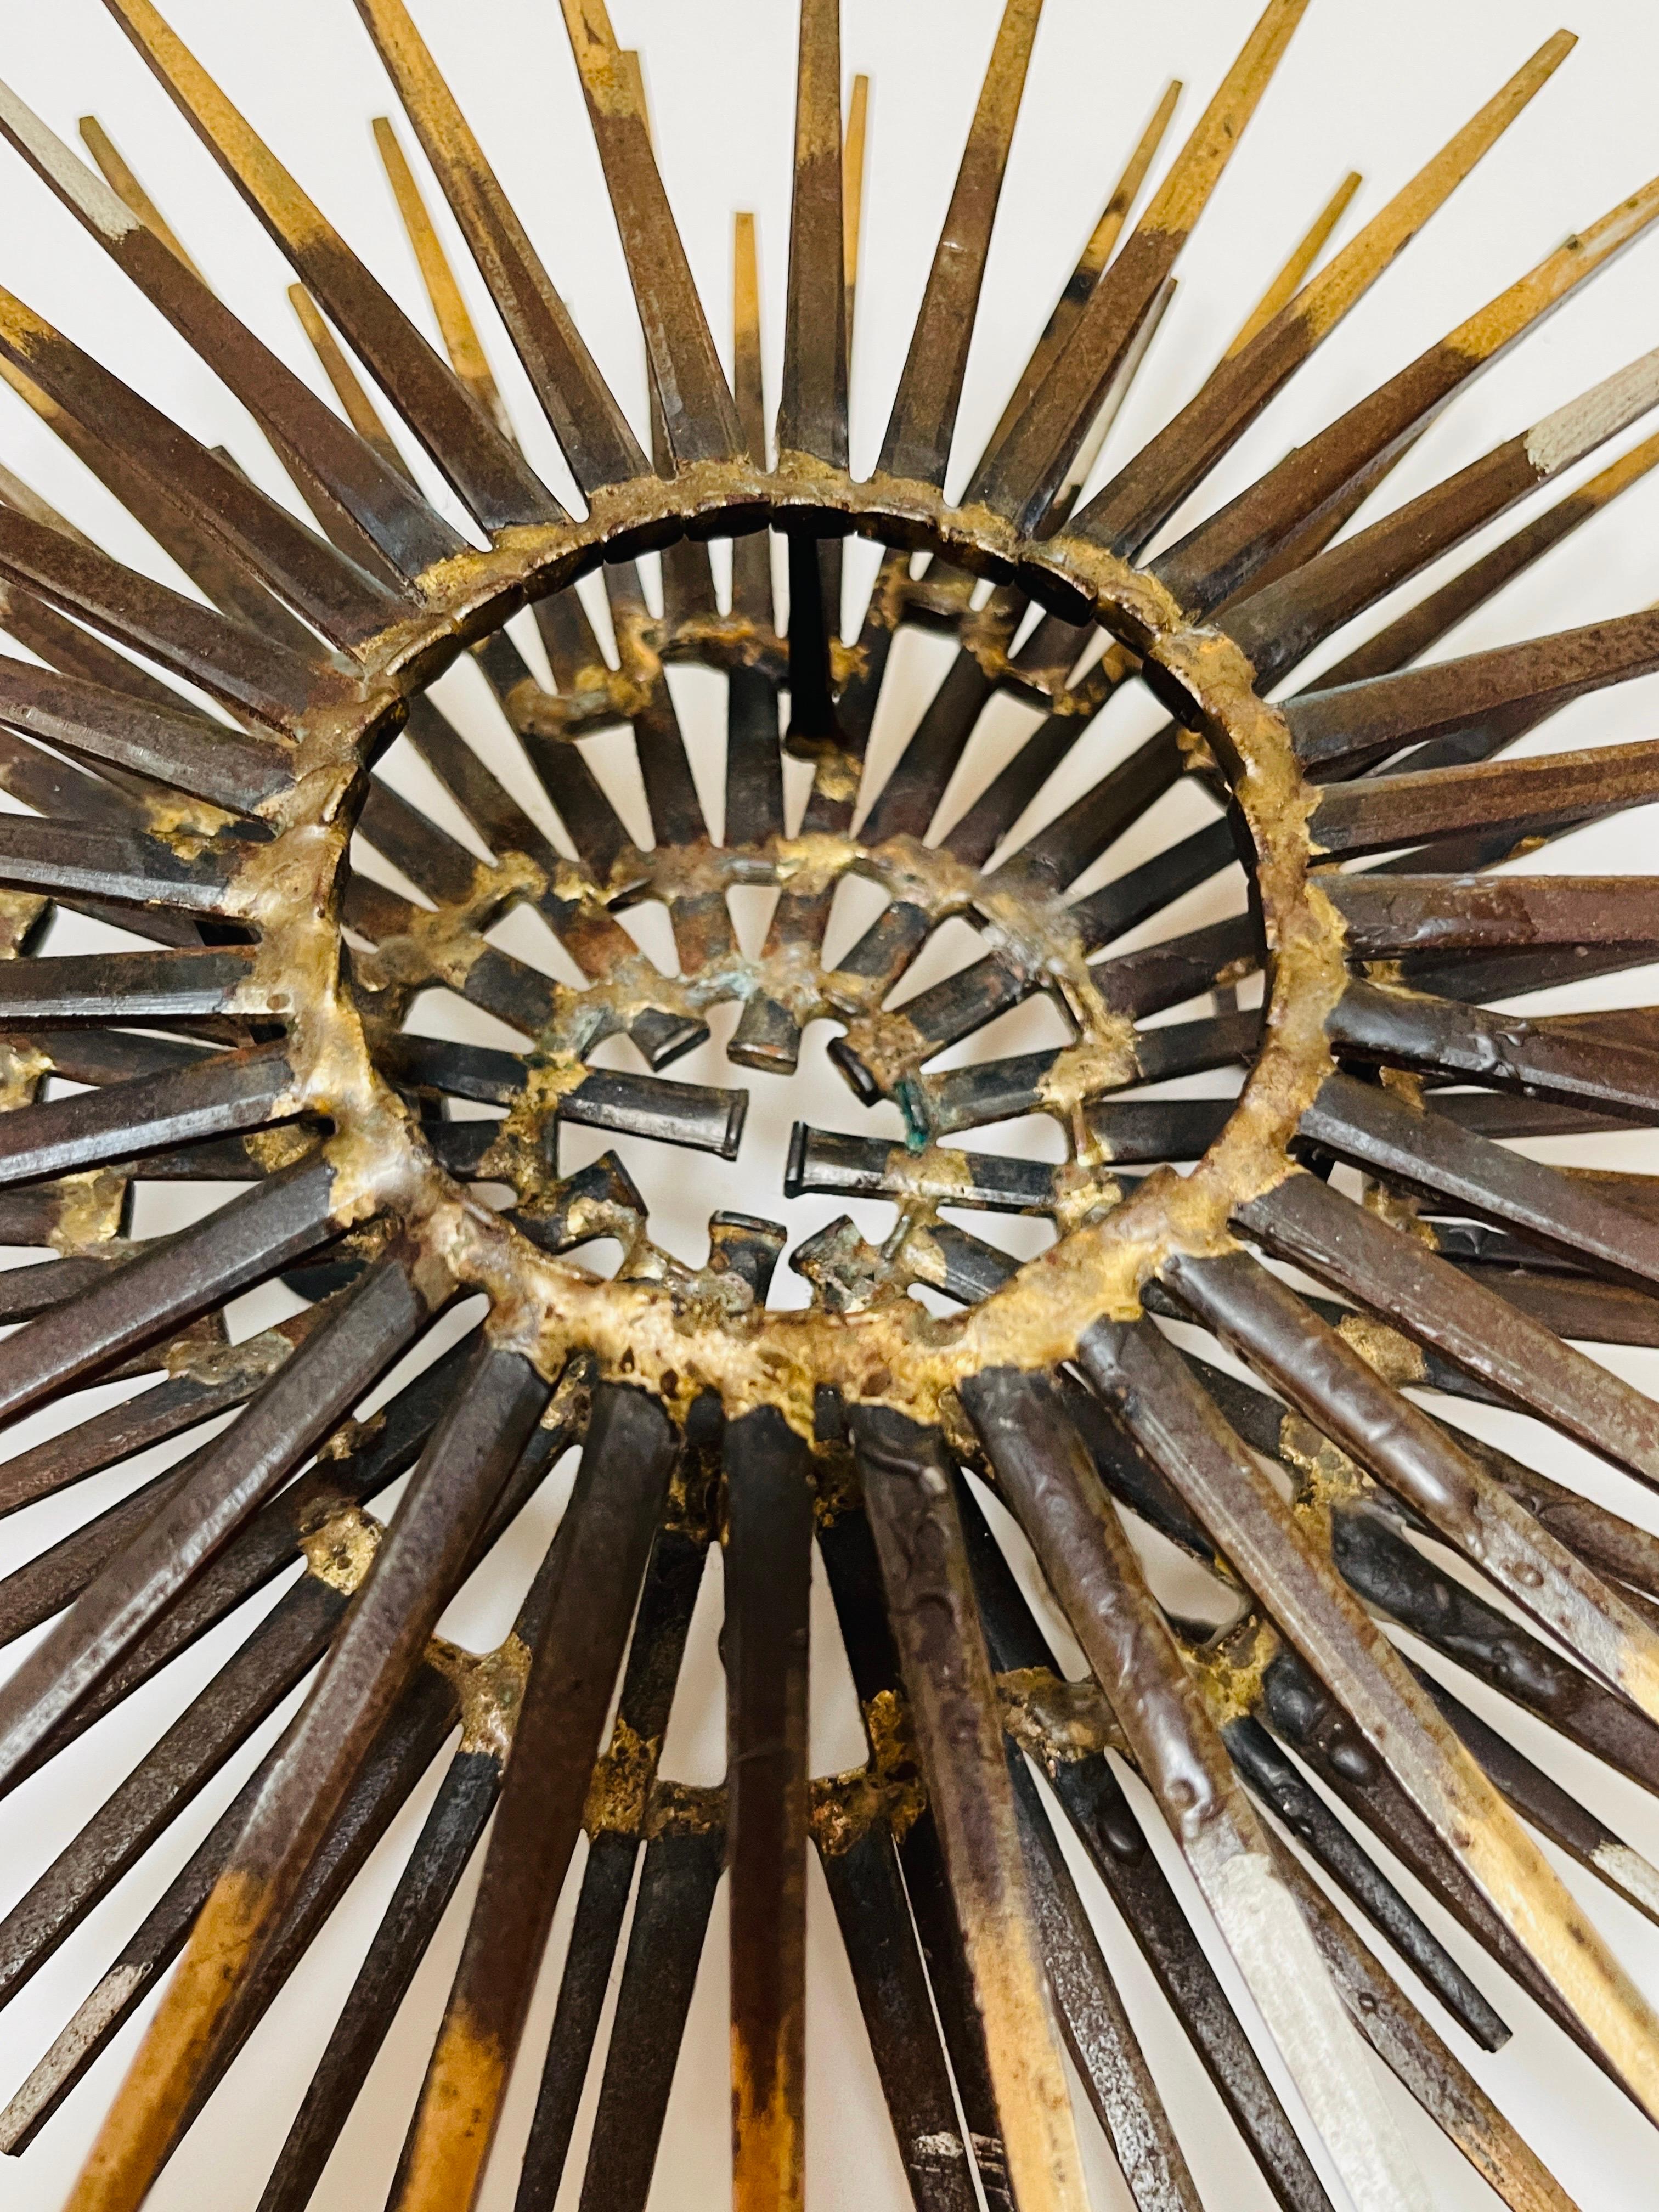 American Diminutive Gilt Iron Two-Tier Sunburst Wall Sculpture by William Bowie For Sale